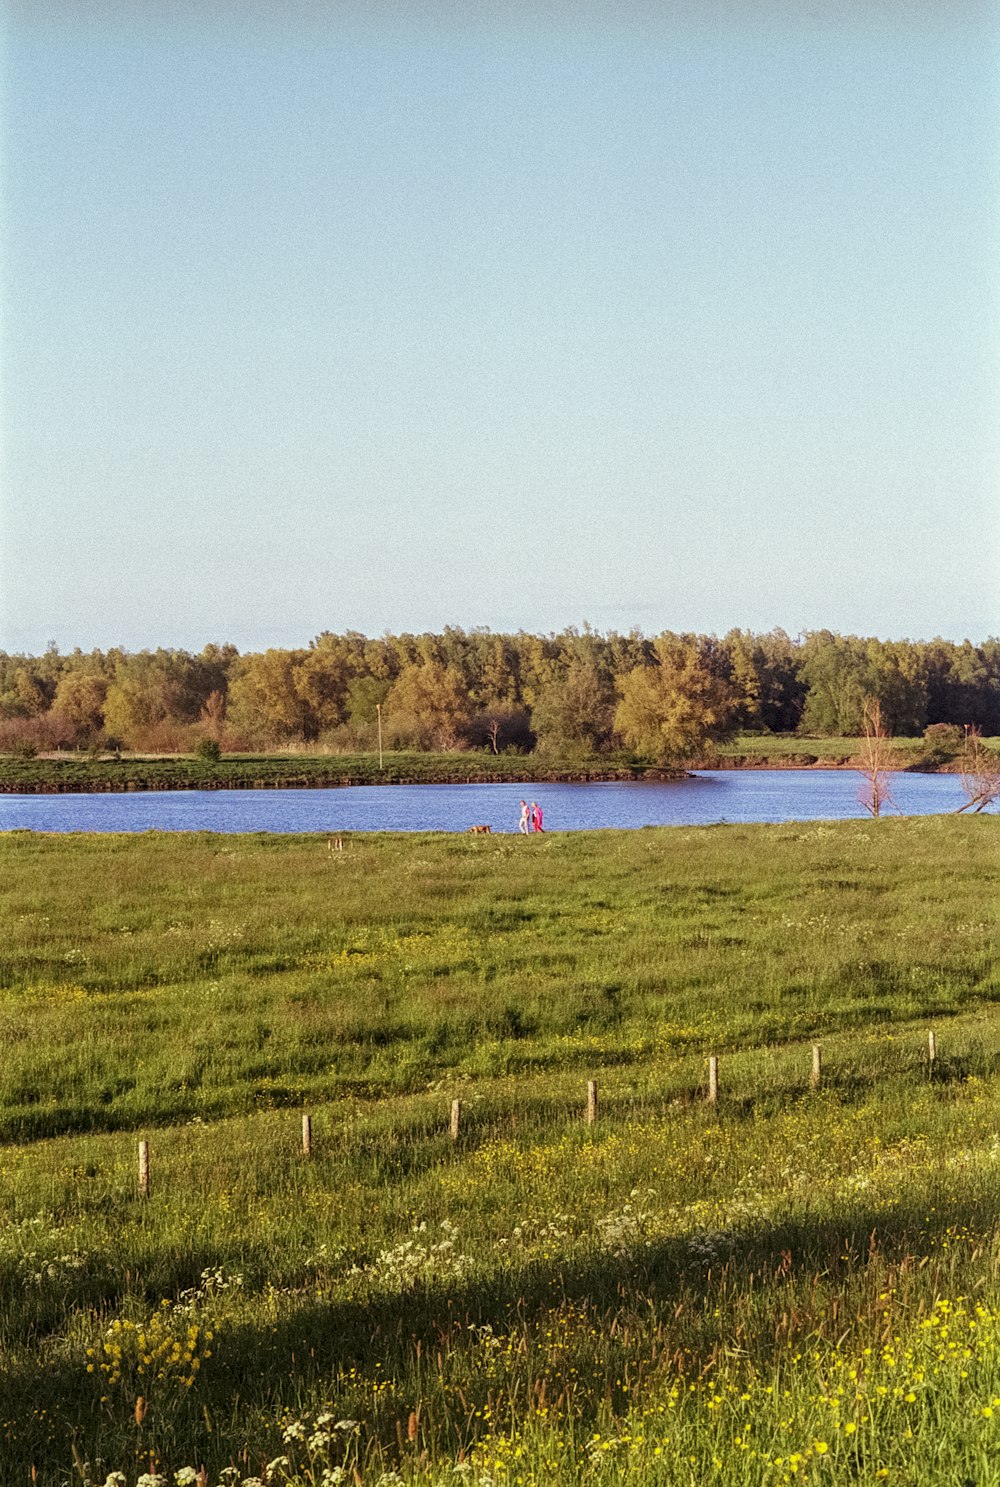 a large grassy field with a lake in the background